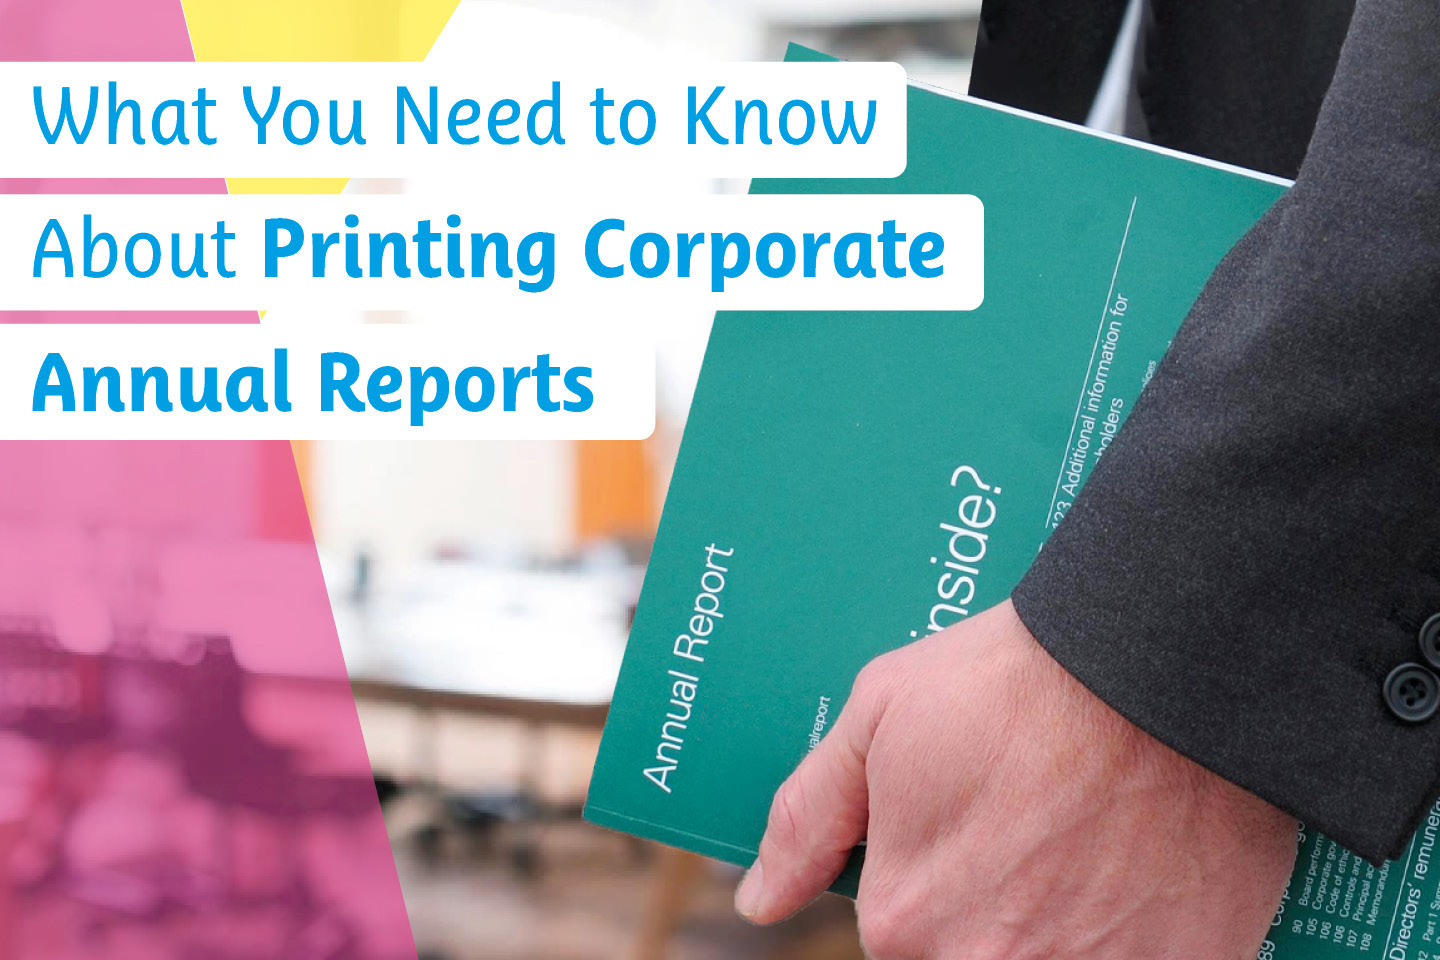 What You Need To Know About Printing Corporate Annual Reports